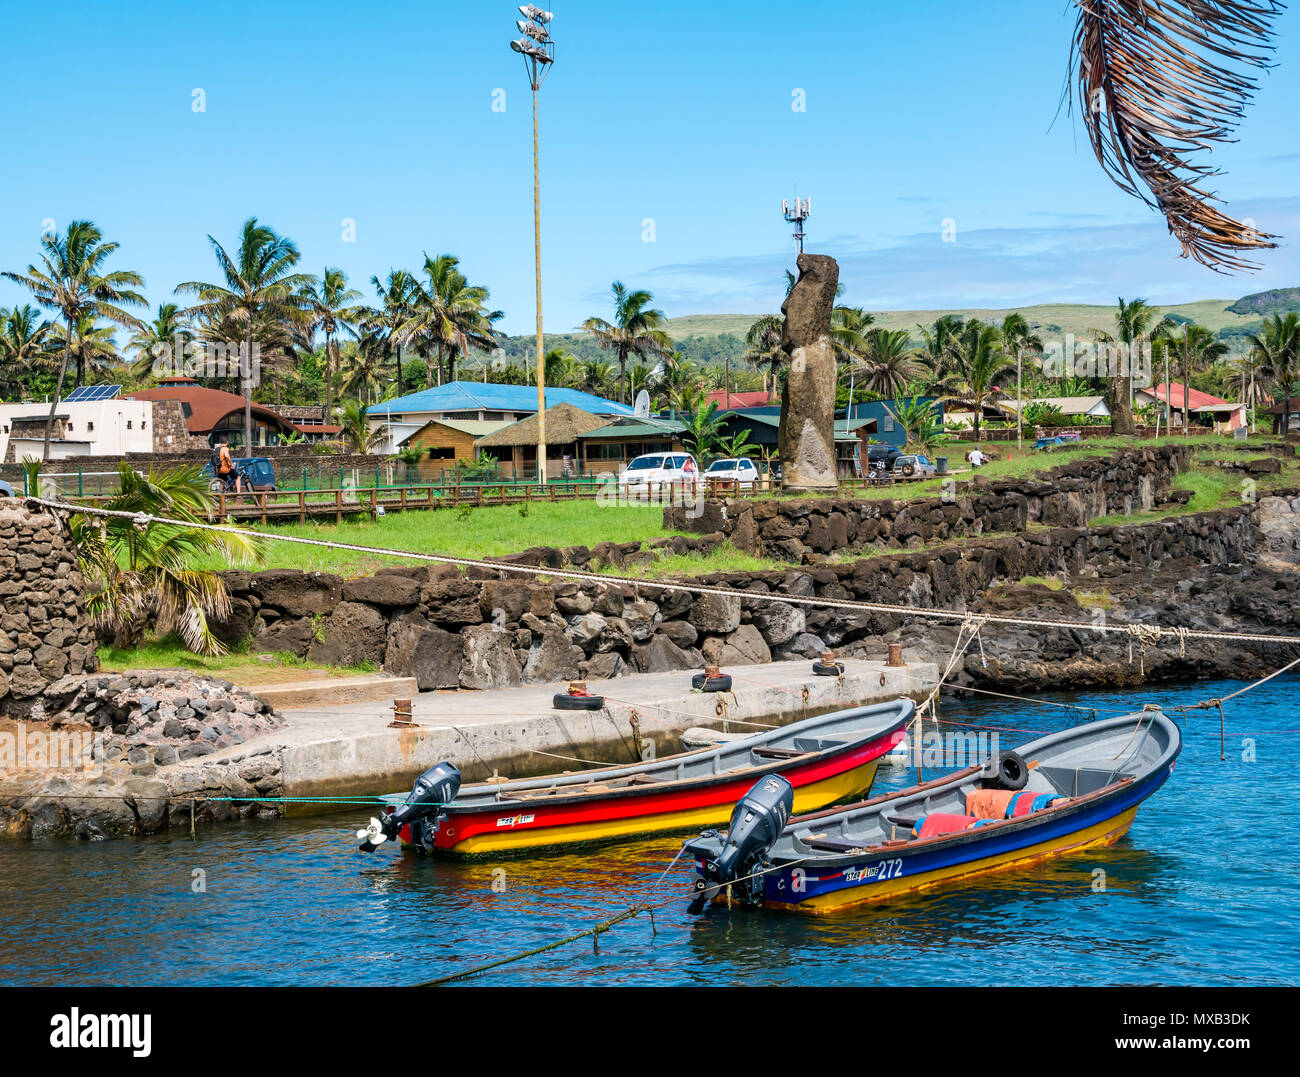 Colourful small boats with outboard engines tied up in harbour, Hanga Roa, Easter Island, Rapa Nui, Chile Stock Photo